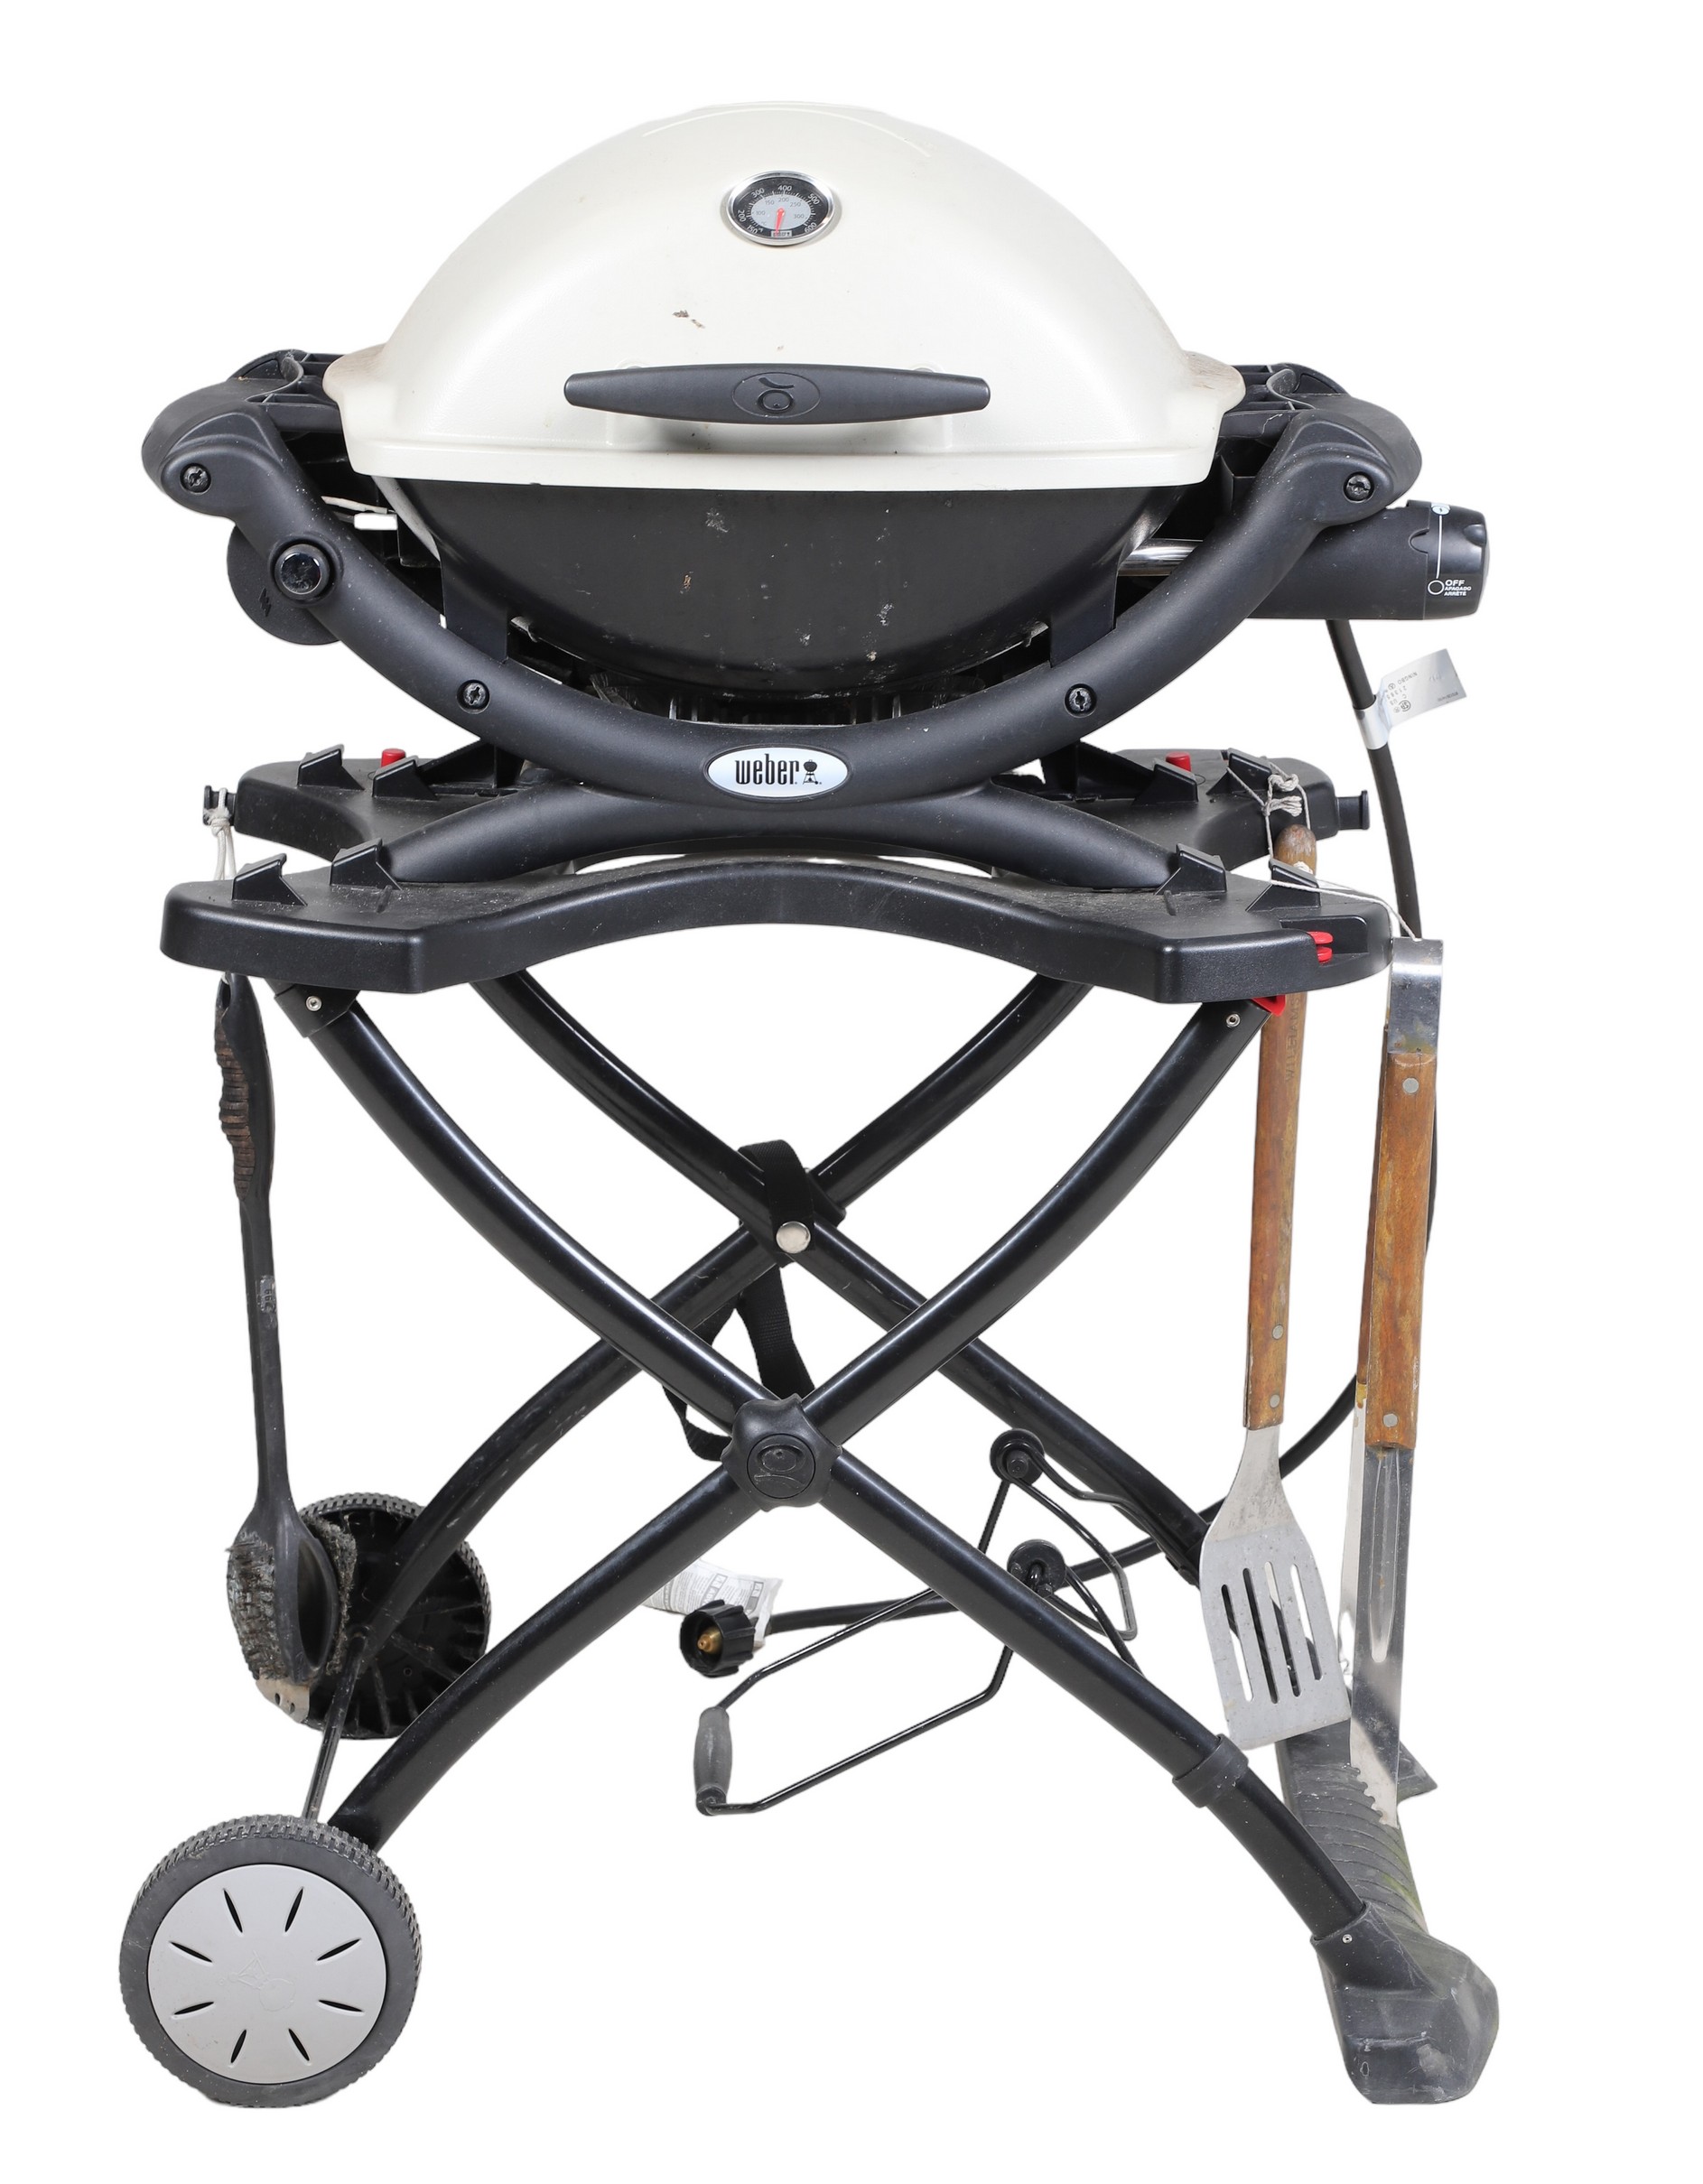 Small Weber grill on stationary cart